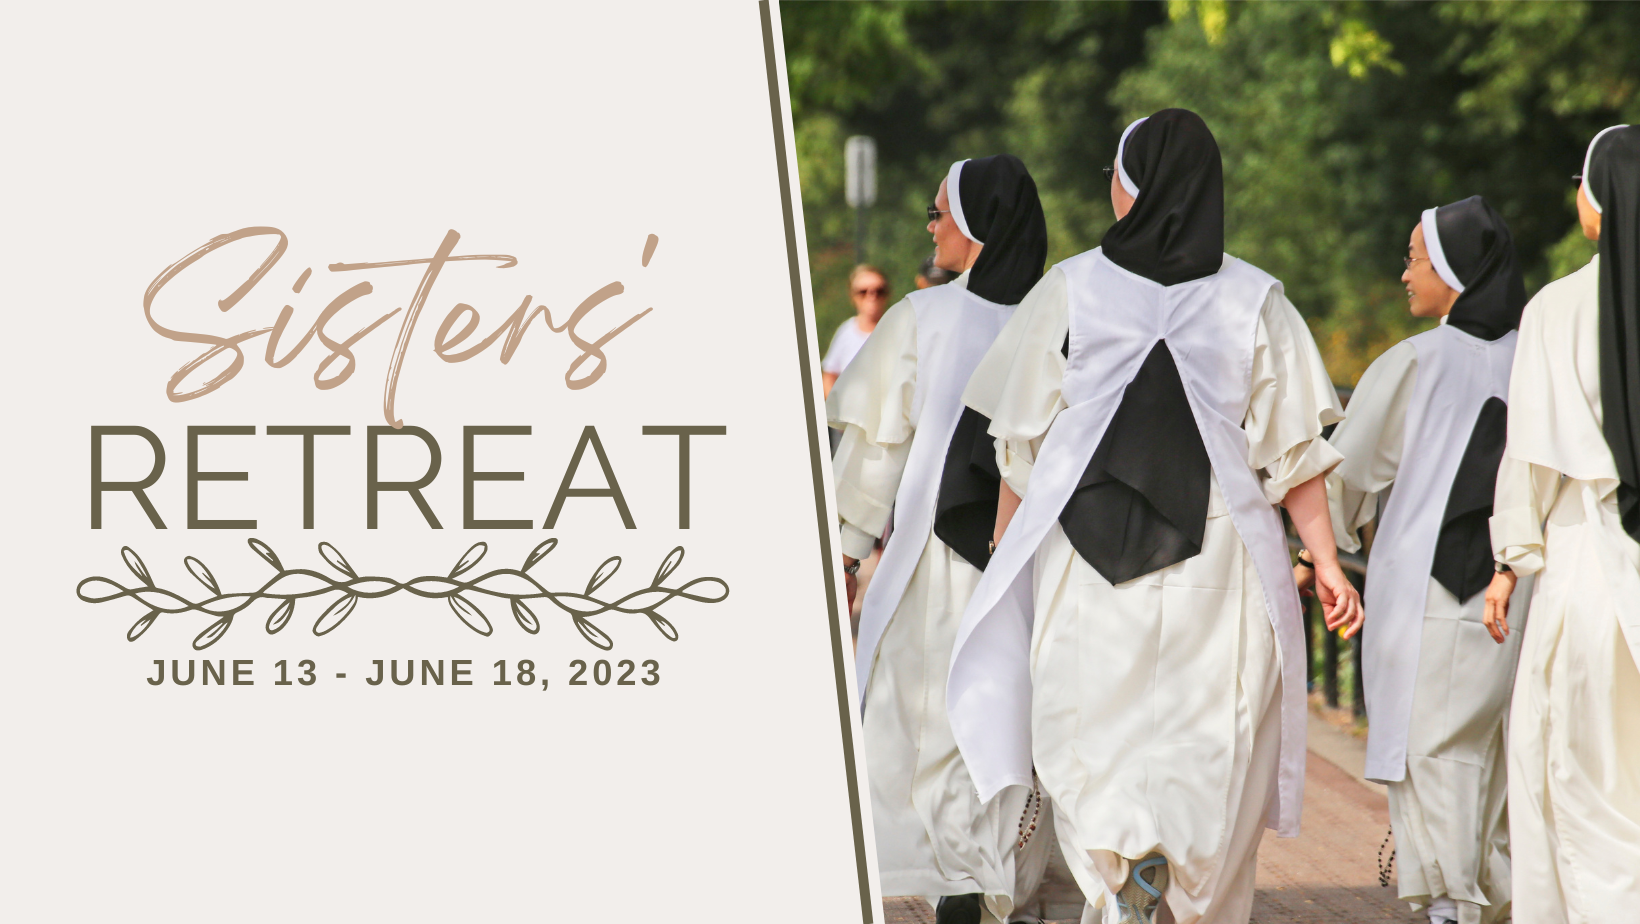 Religious Sisters’ Retreat 2023: Living the Lord’s Prayer